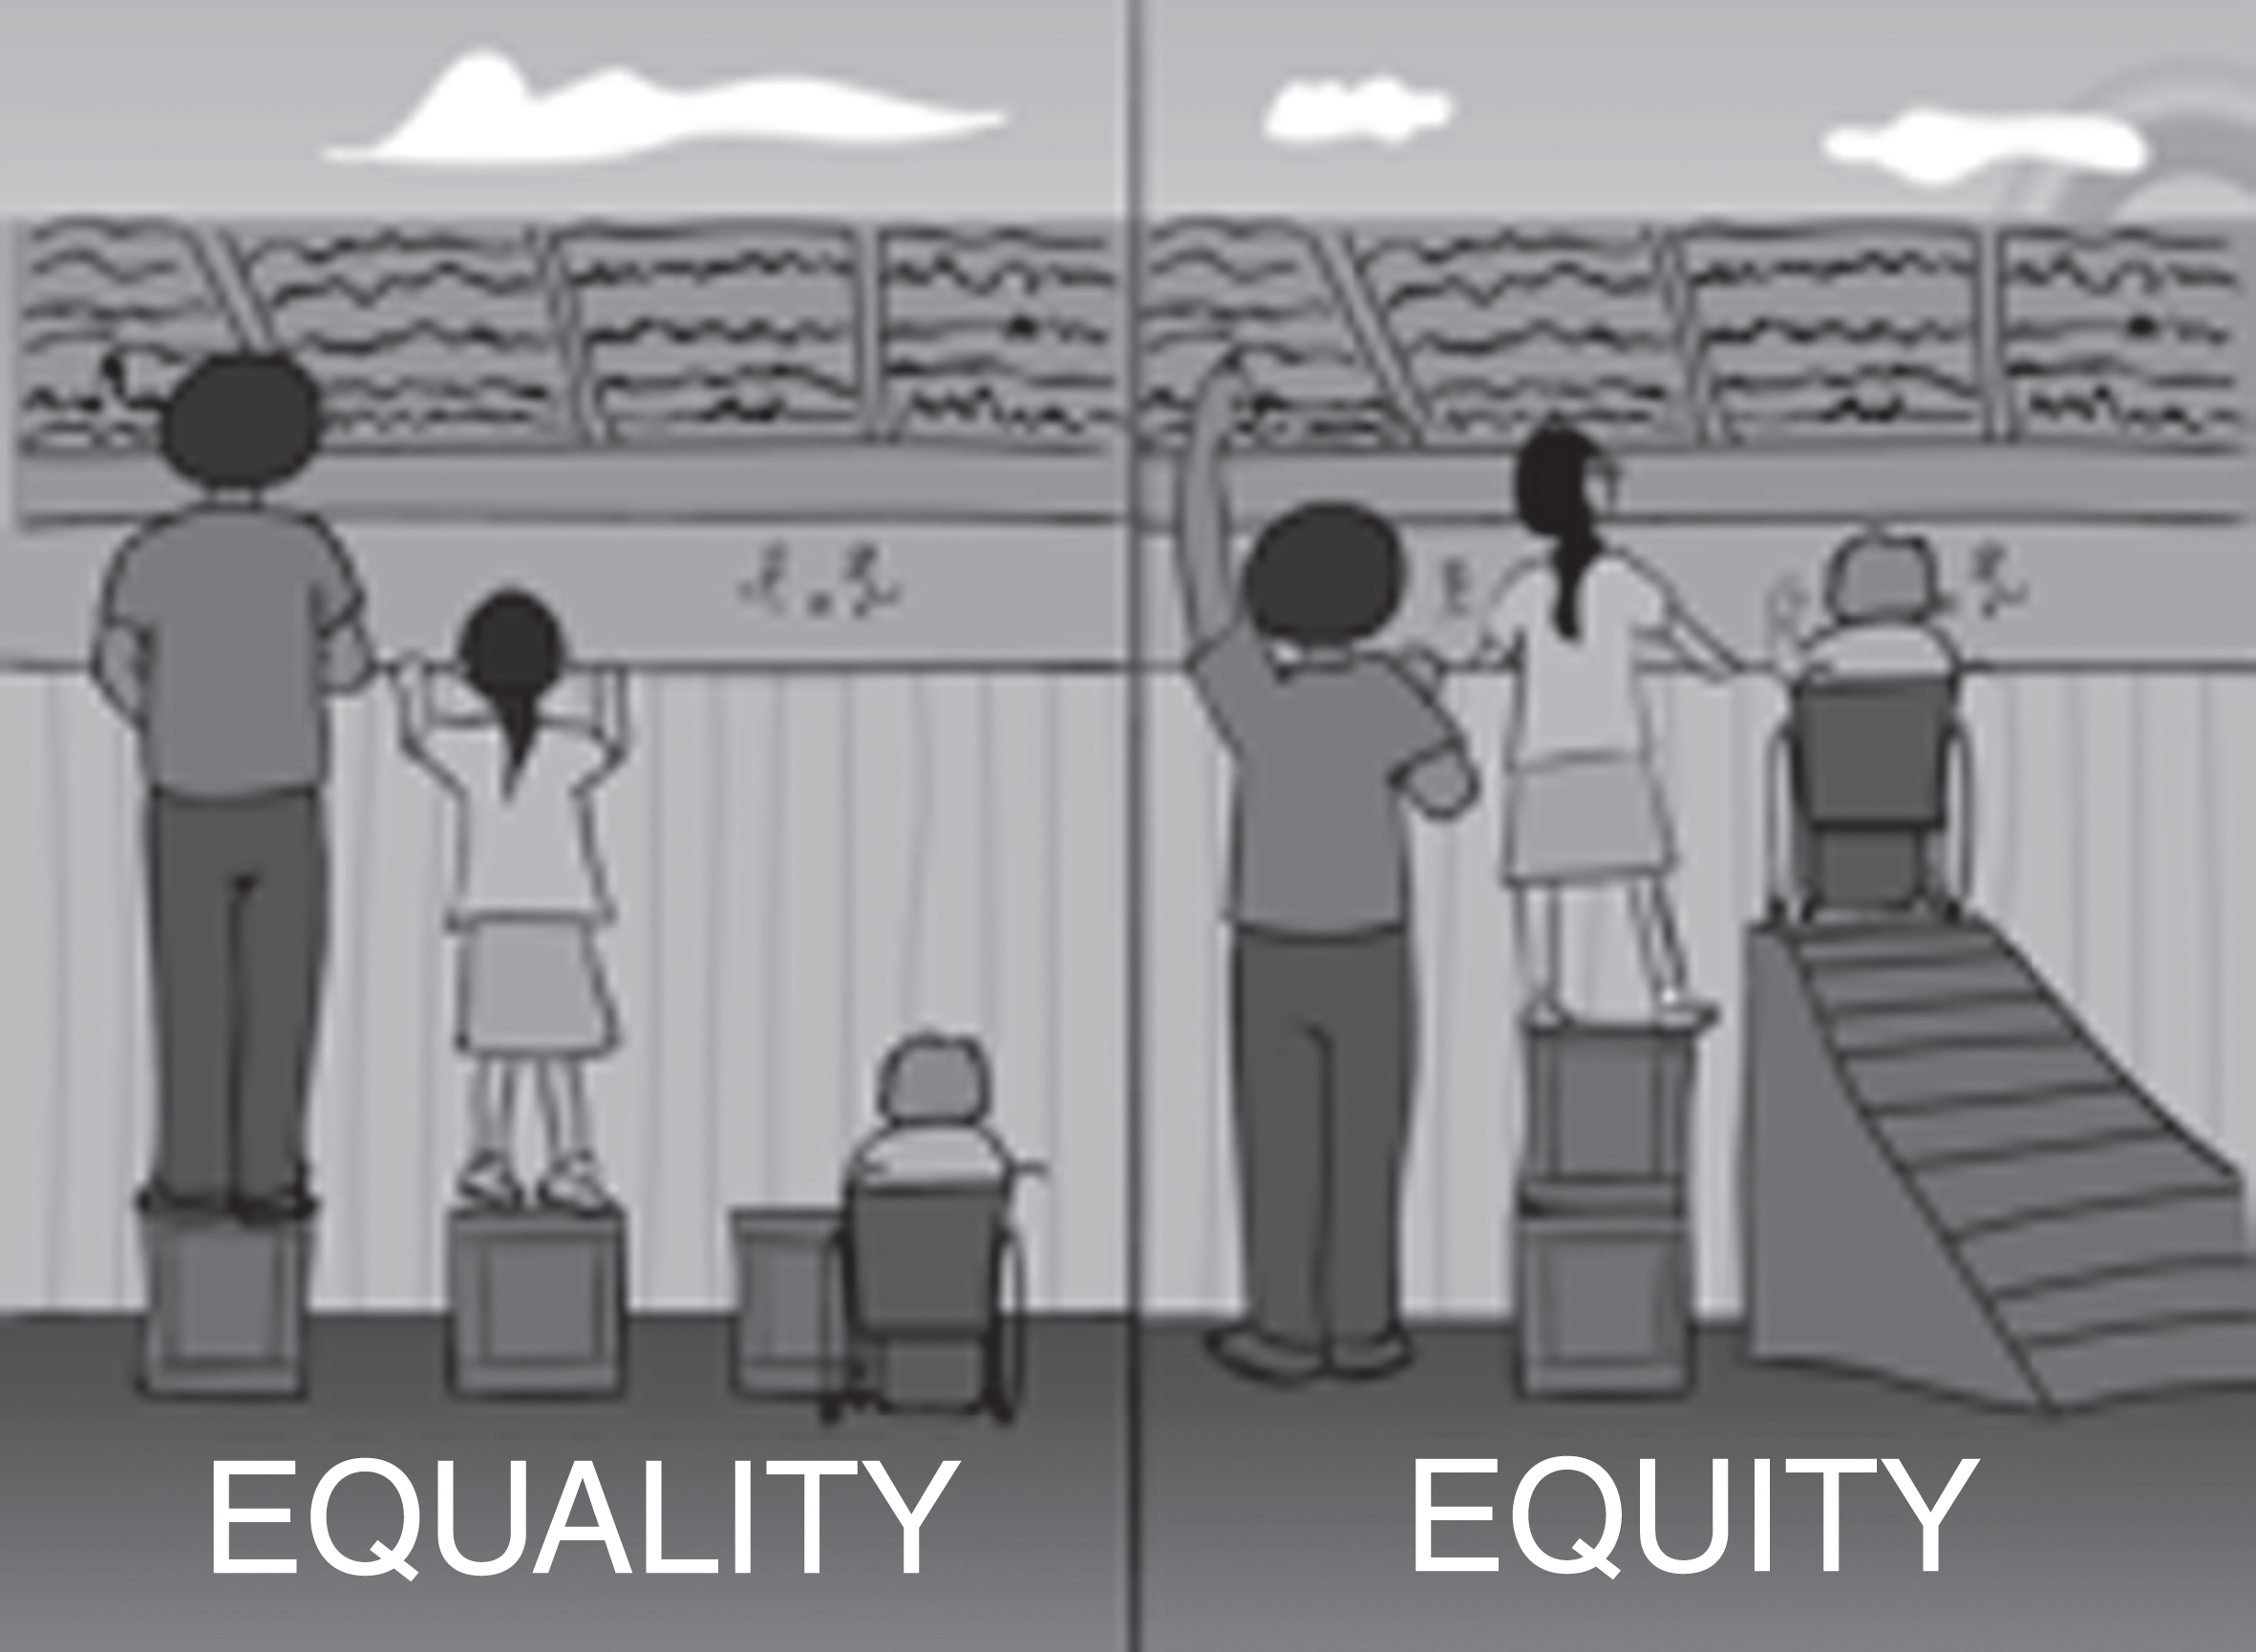 Equal resources vs equal chances (from: http://muslimgirl.com/46703/heres-care-equity-equality/).